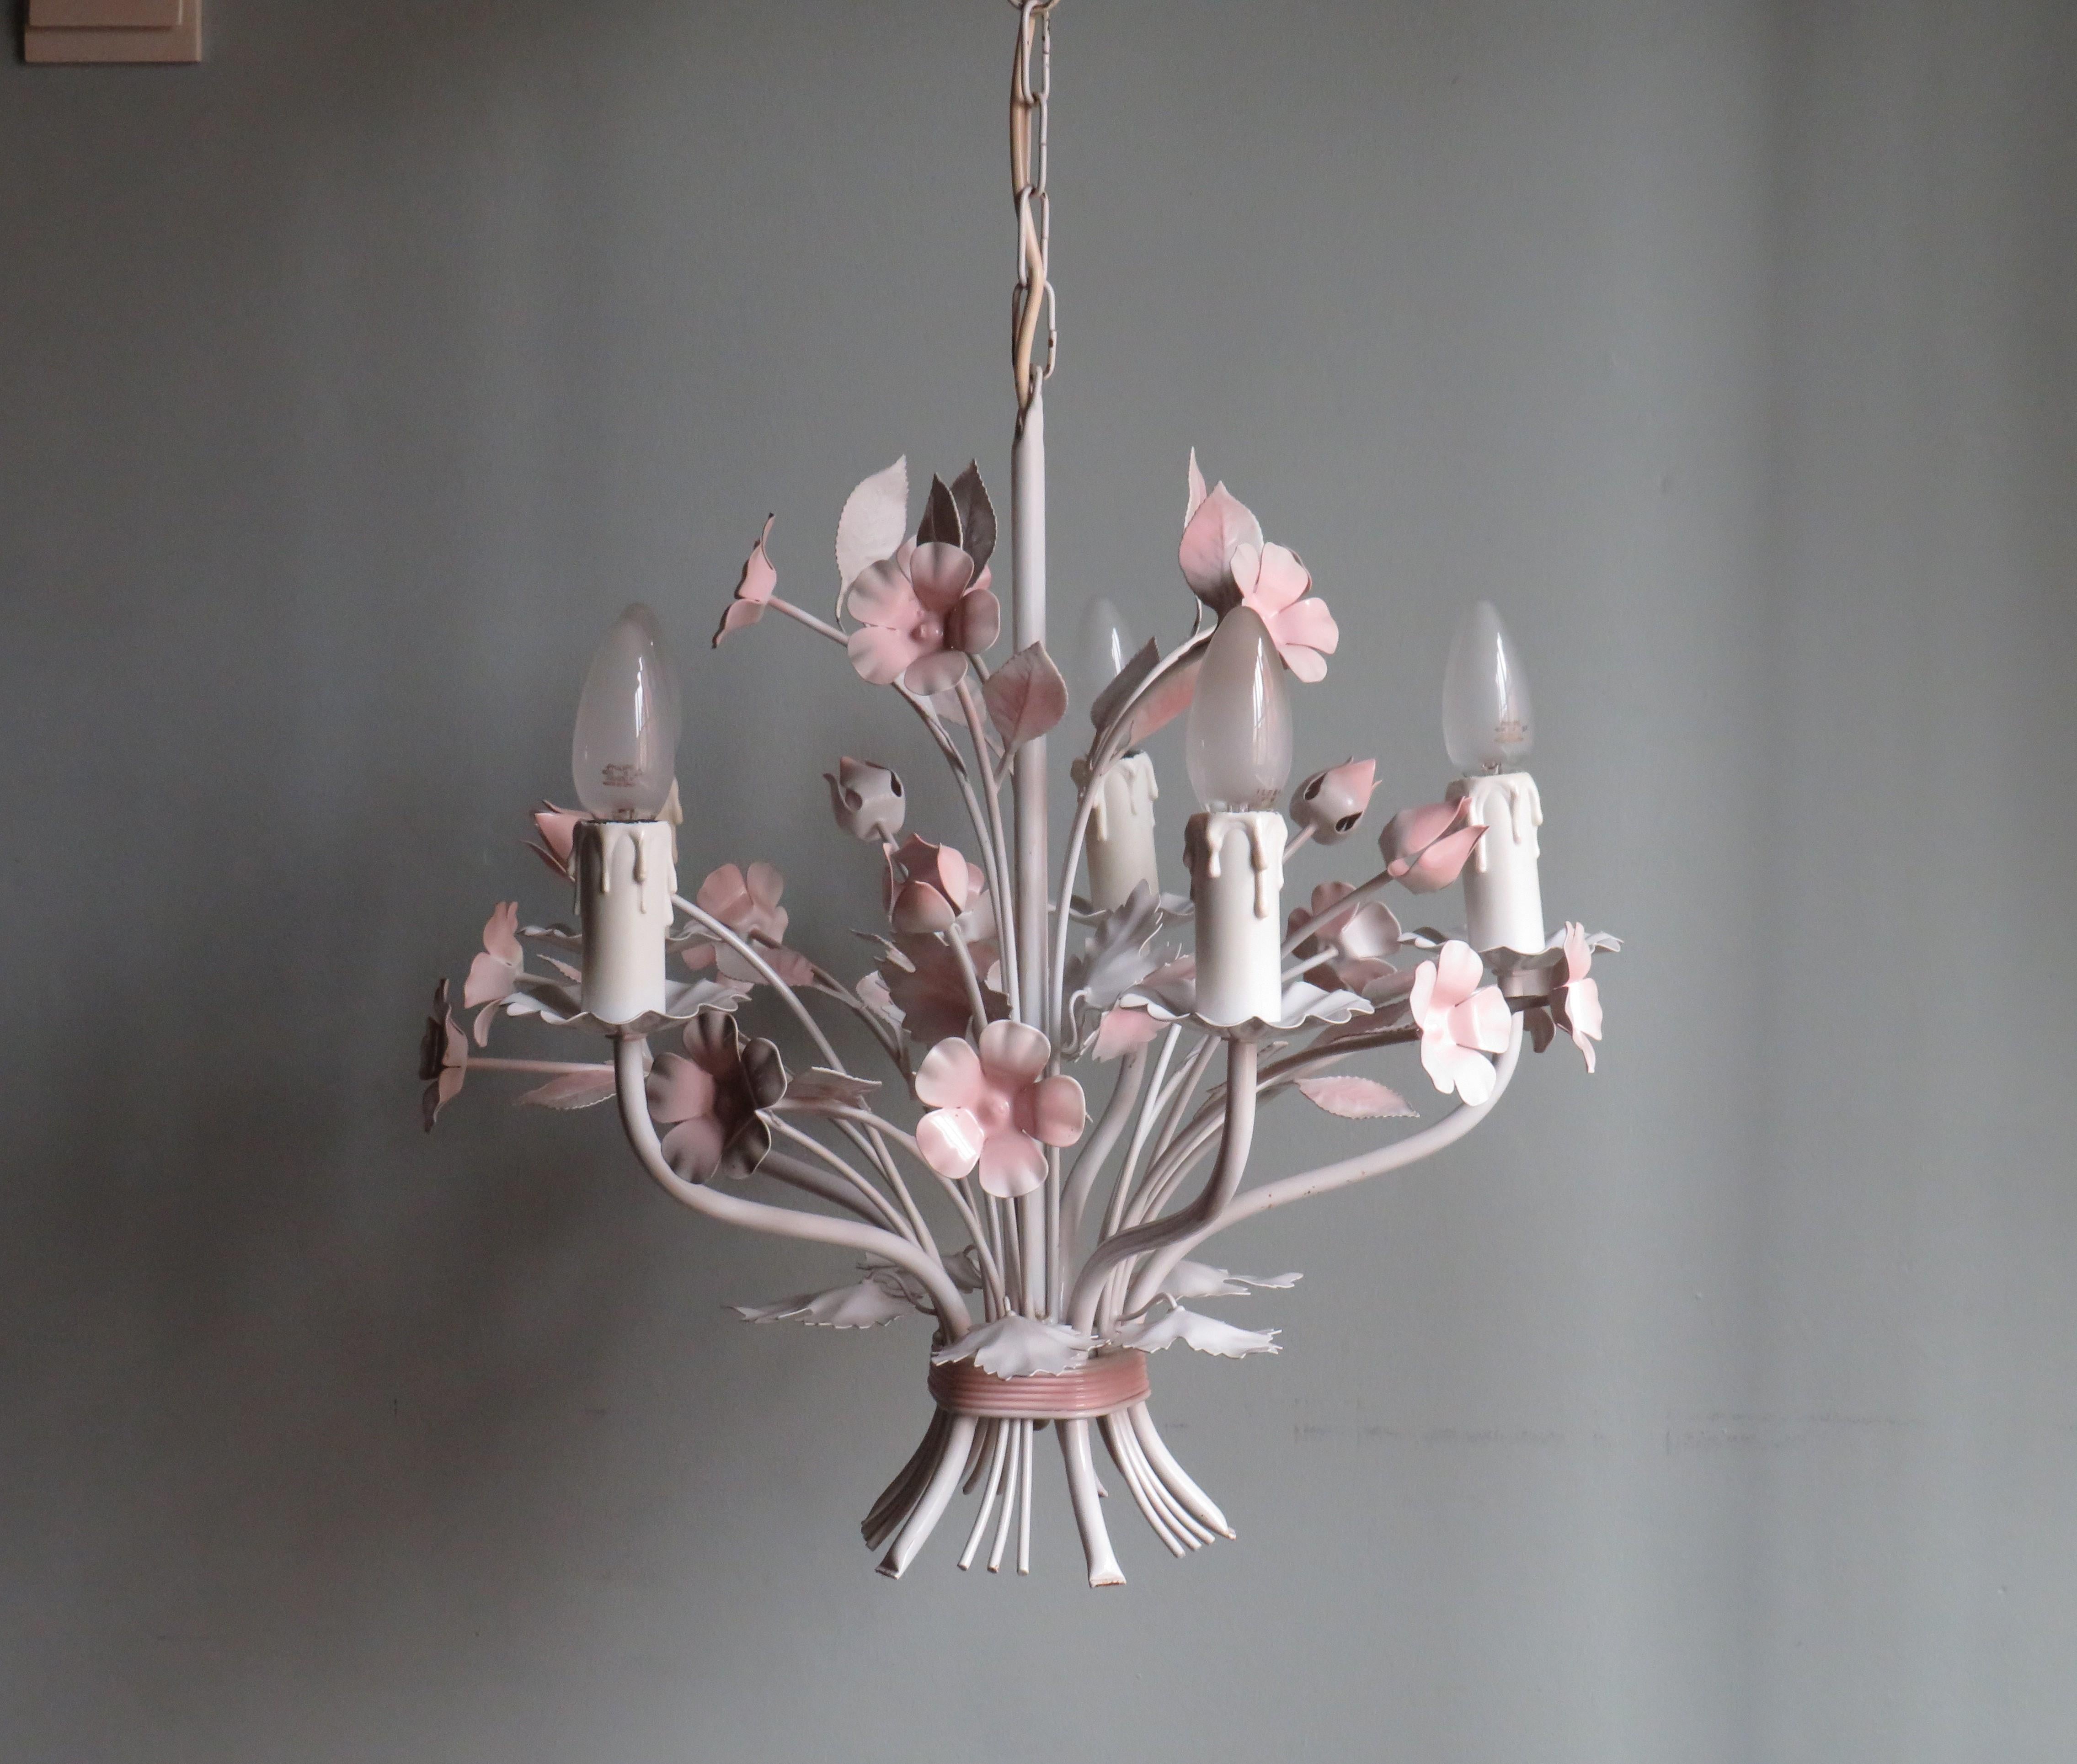 Mid-Century Modern Vintage Toleware Chandelier with Floral Motifs, Italy, 1960s For Sale